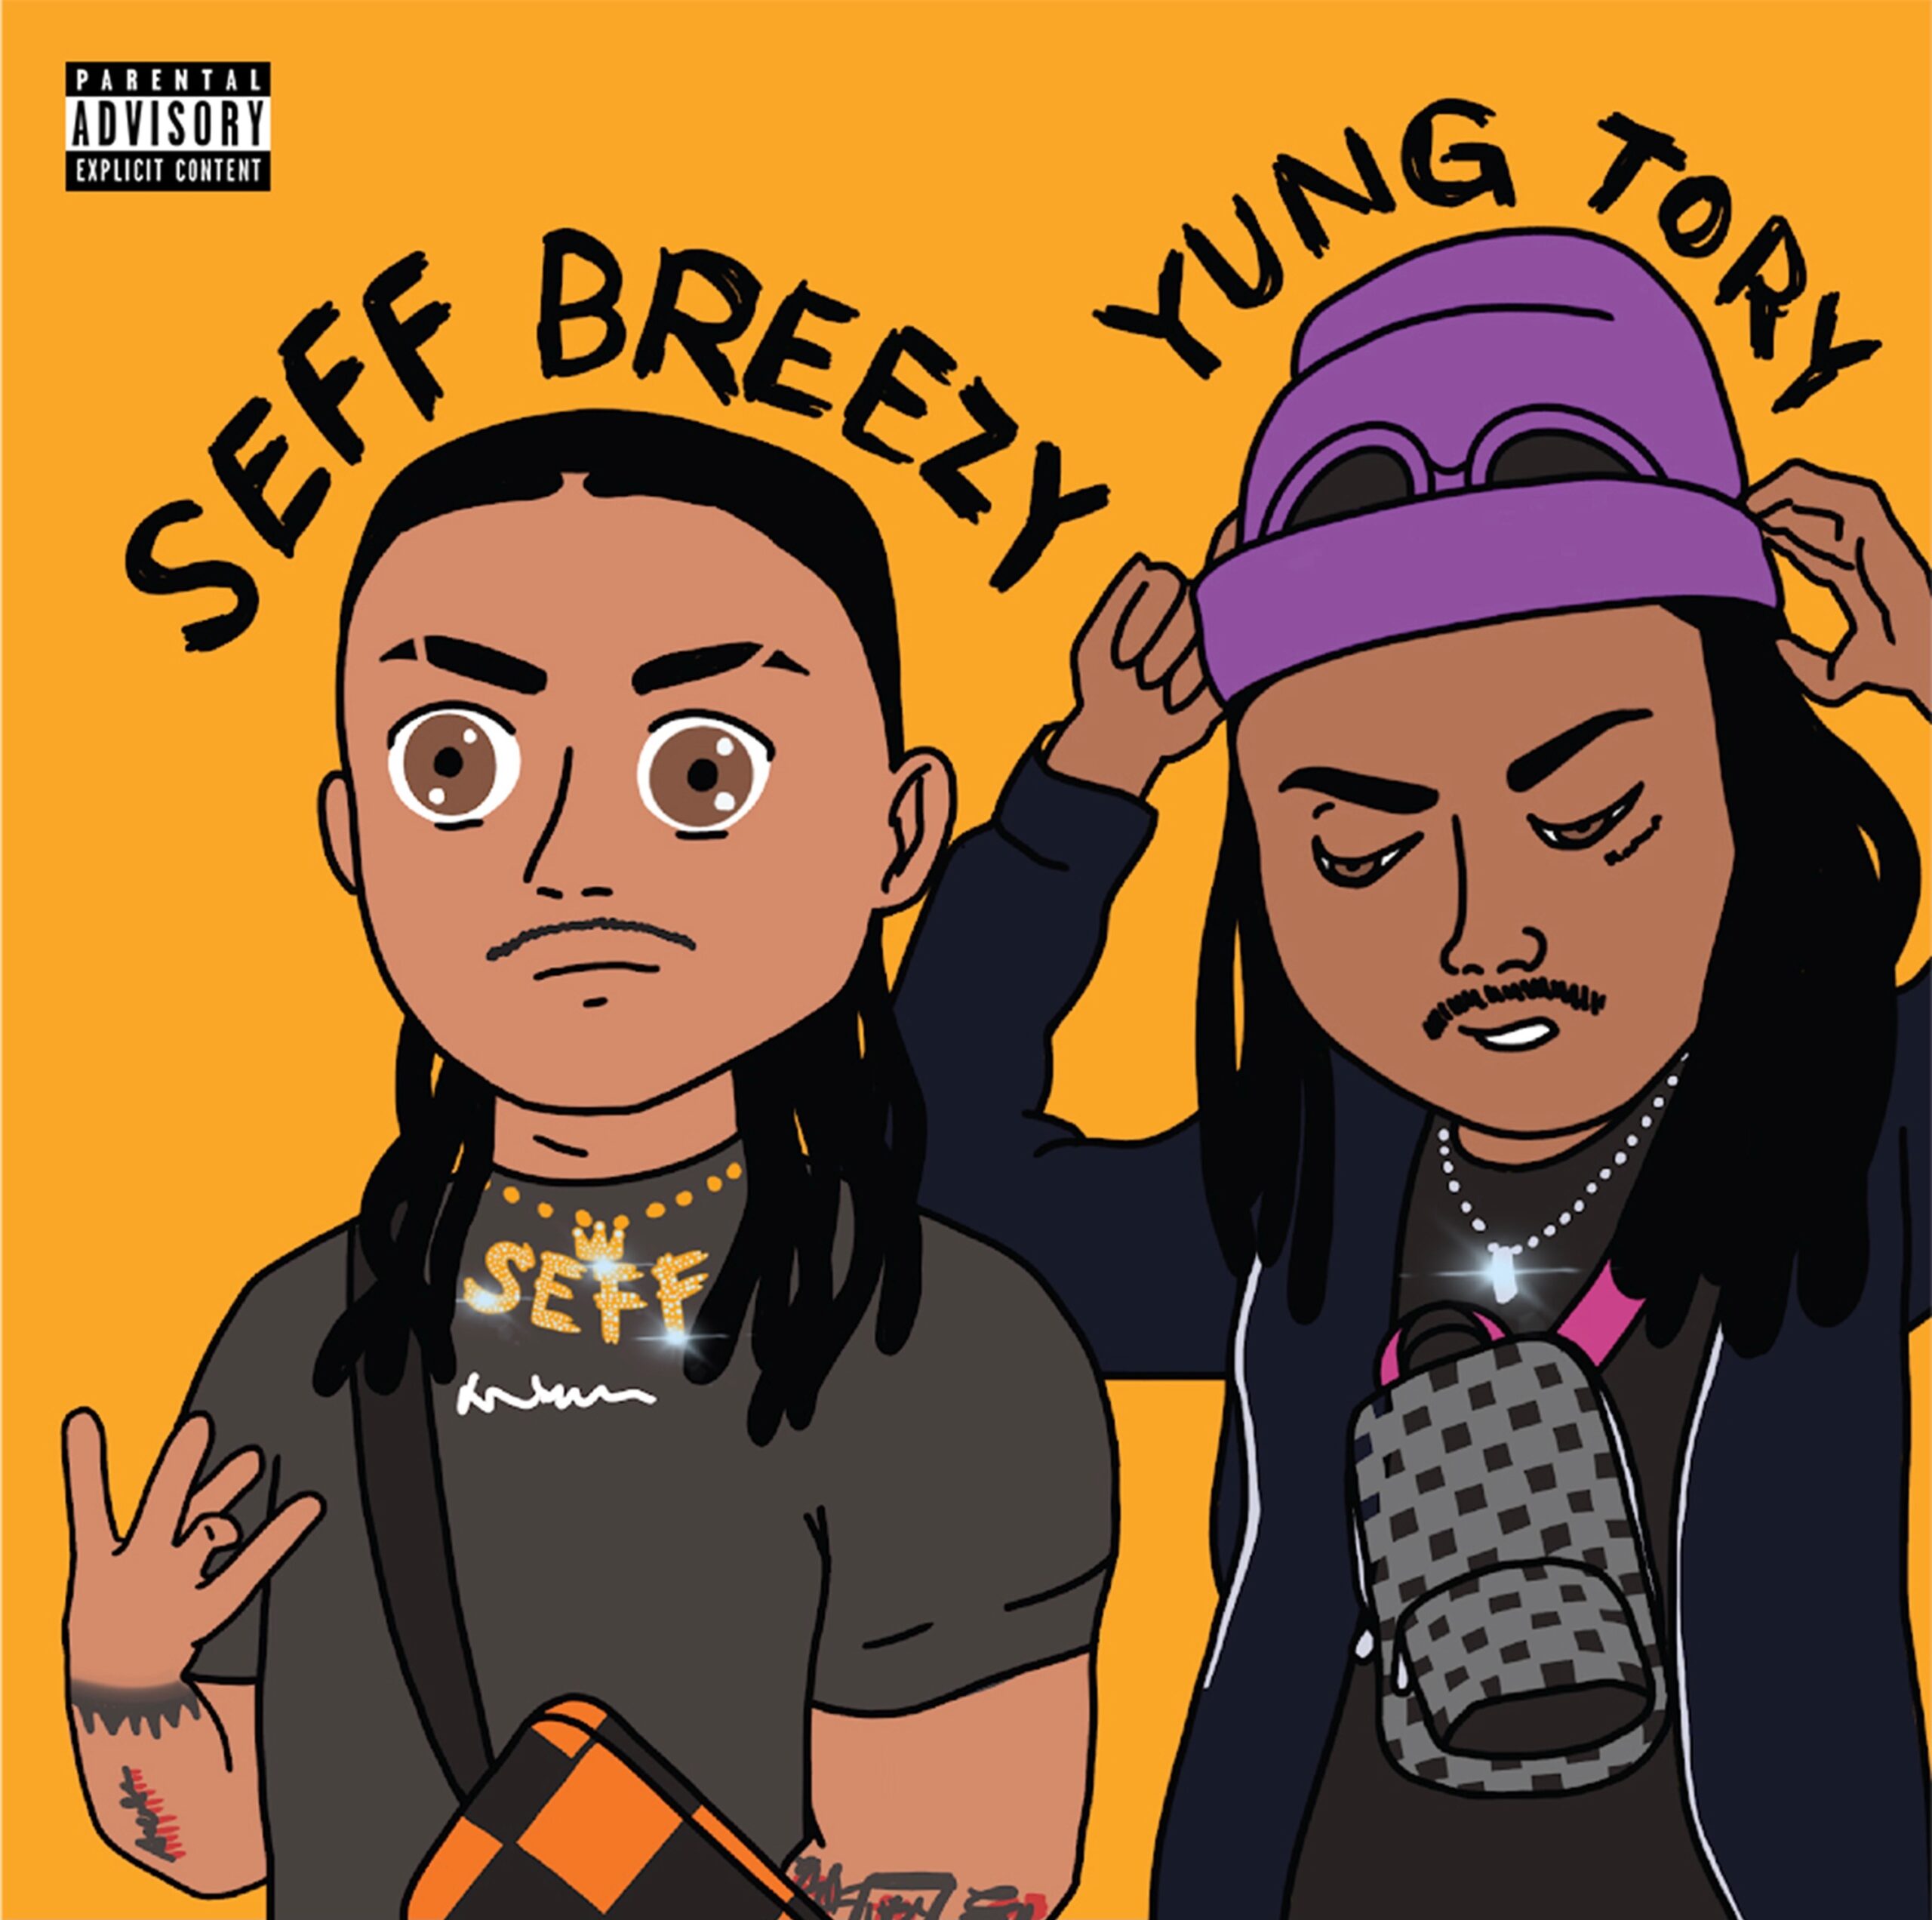 Seff Breezy & Yung Tory Join Forces on New Song “Hold Up”